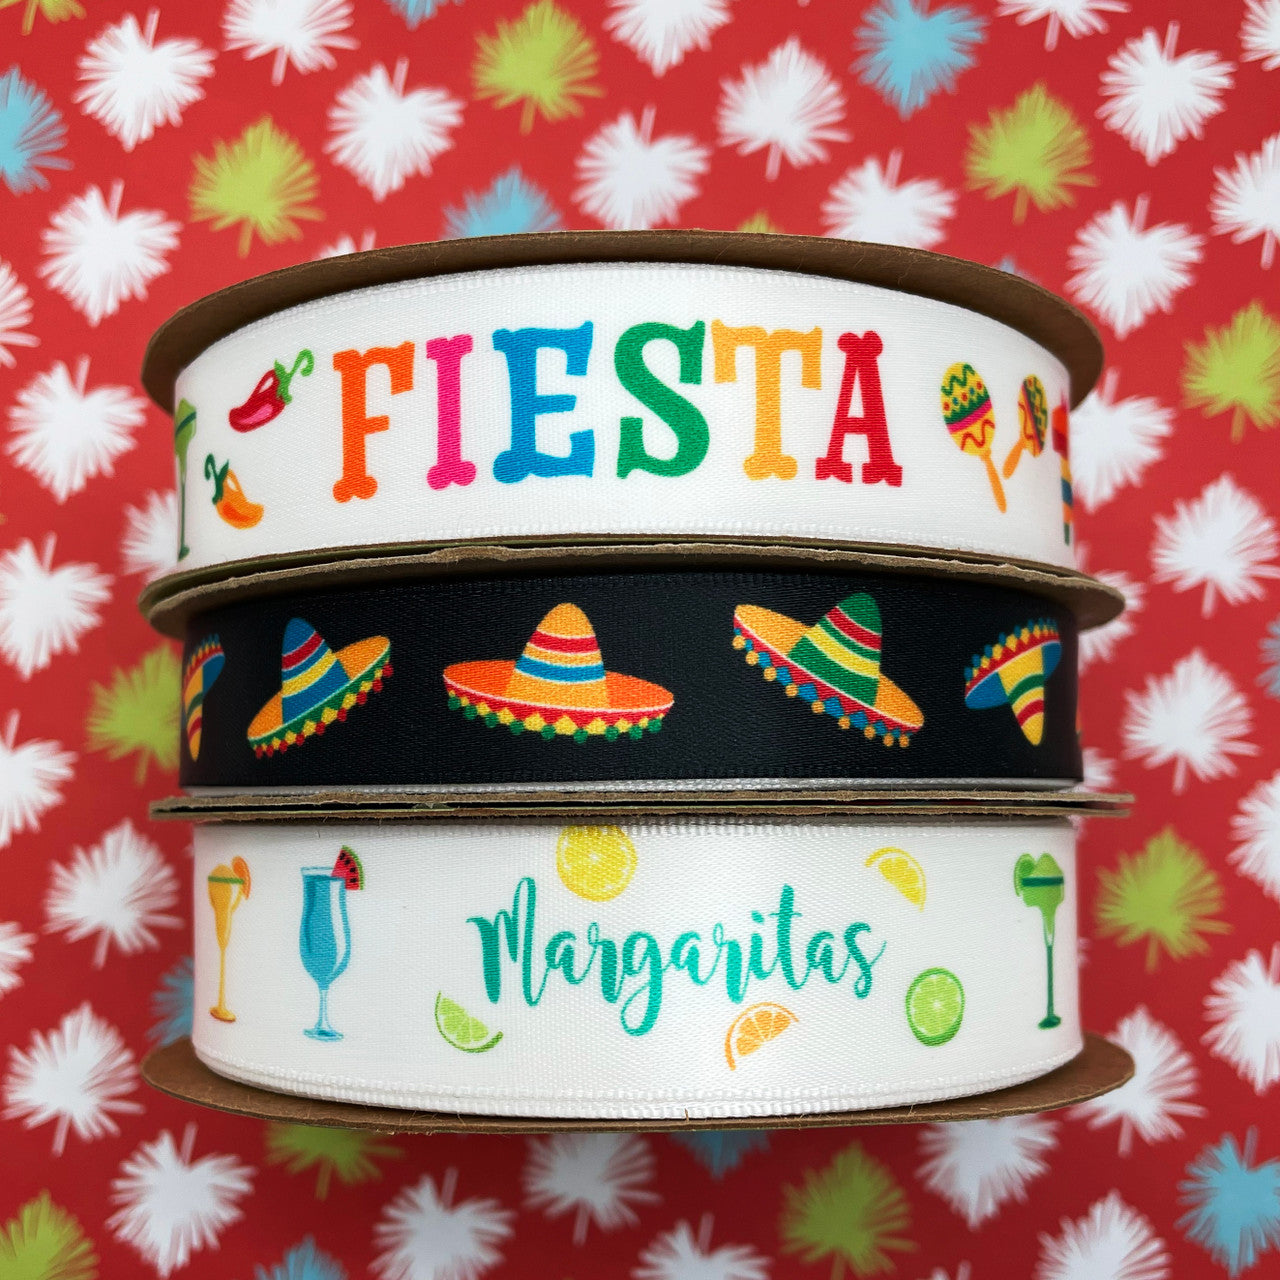 Mix and match our Fiesta ribbon with sombreros and margaritas ribbons to complete the party theme!